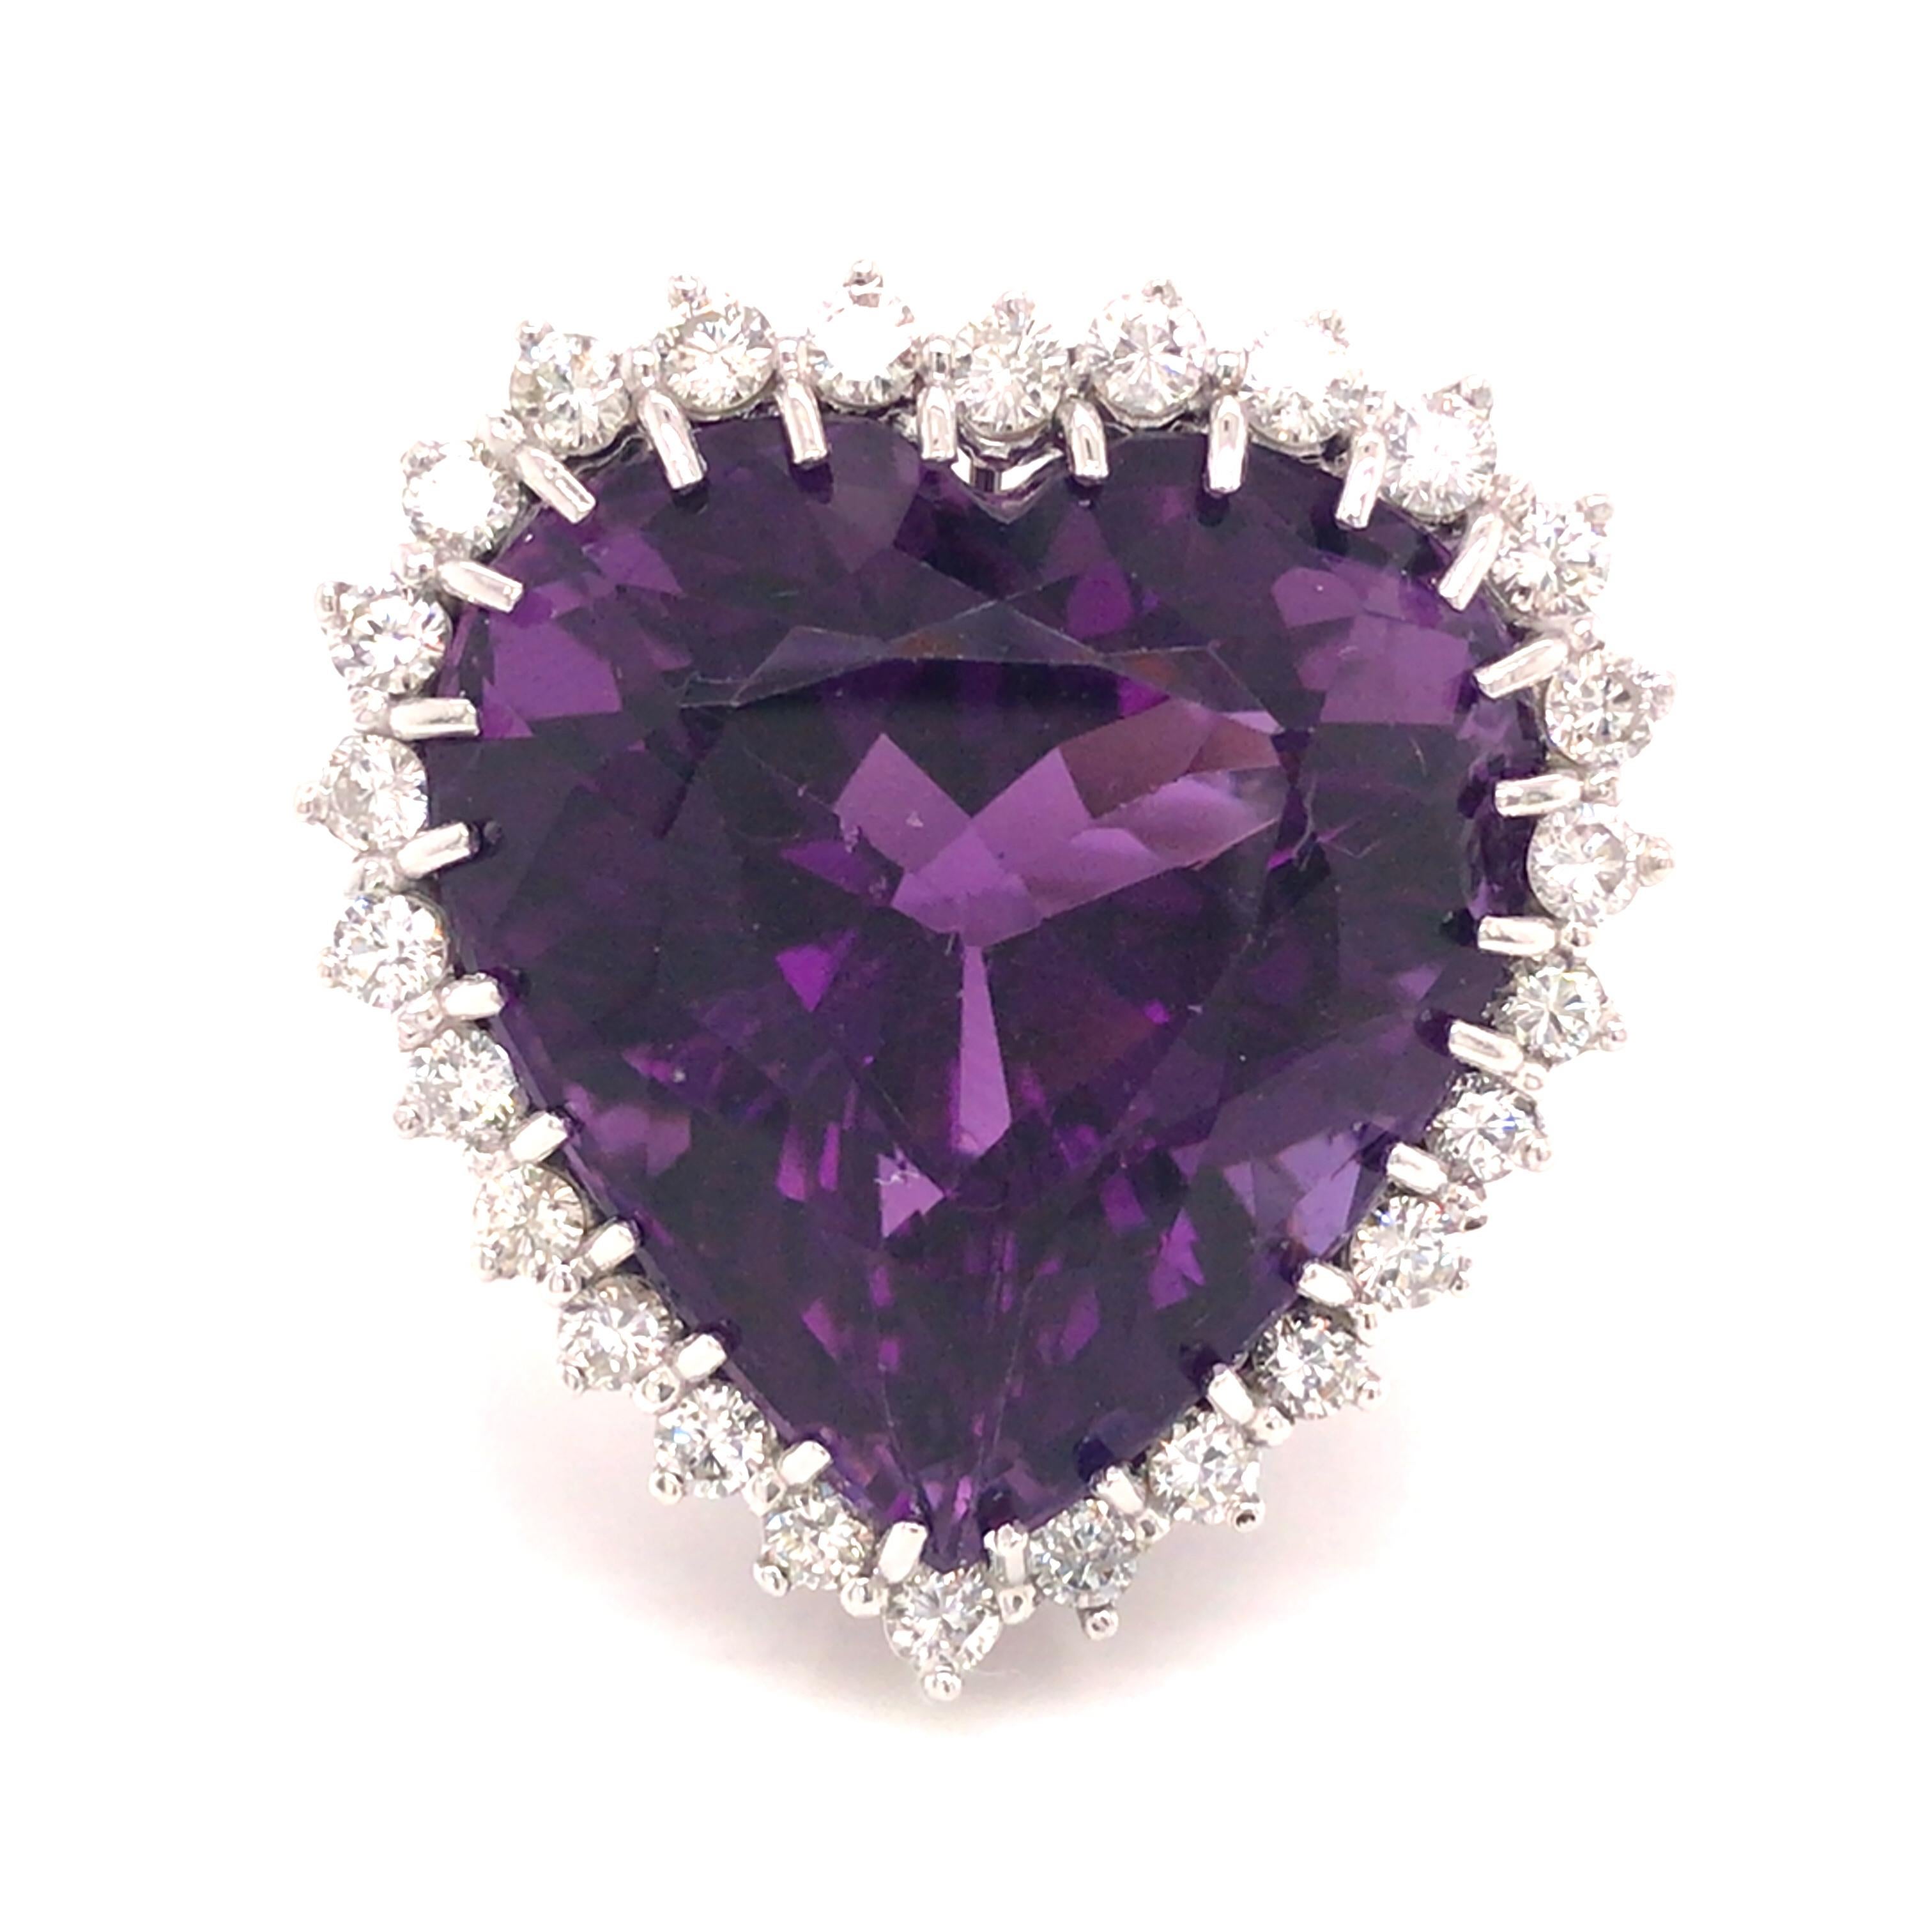 Heart Shape Royal Violet Amethyst Diamond Halo Ring in 14K White Gold.  Round Brilliant Cut Diamonds weighing 1.64 carat total weight, G-H in color and VS-SI in clarity are expertly set in a Halo surrounding the 33 Carat Royal Violet Heart Amethyst.